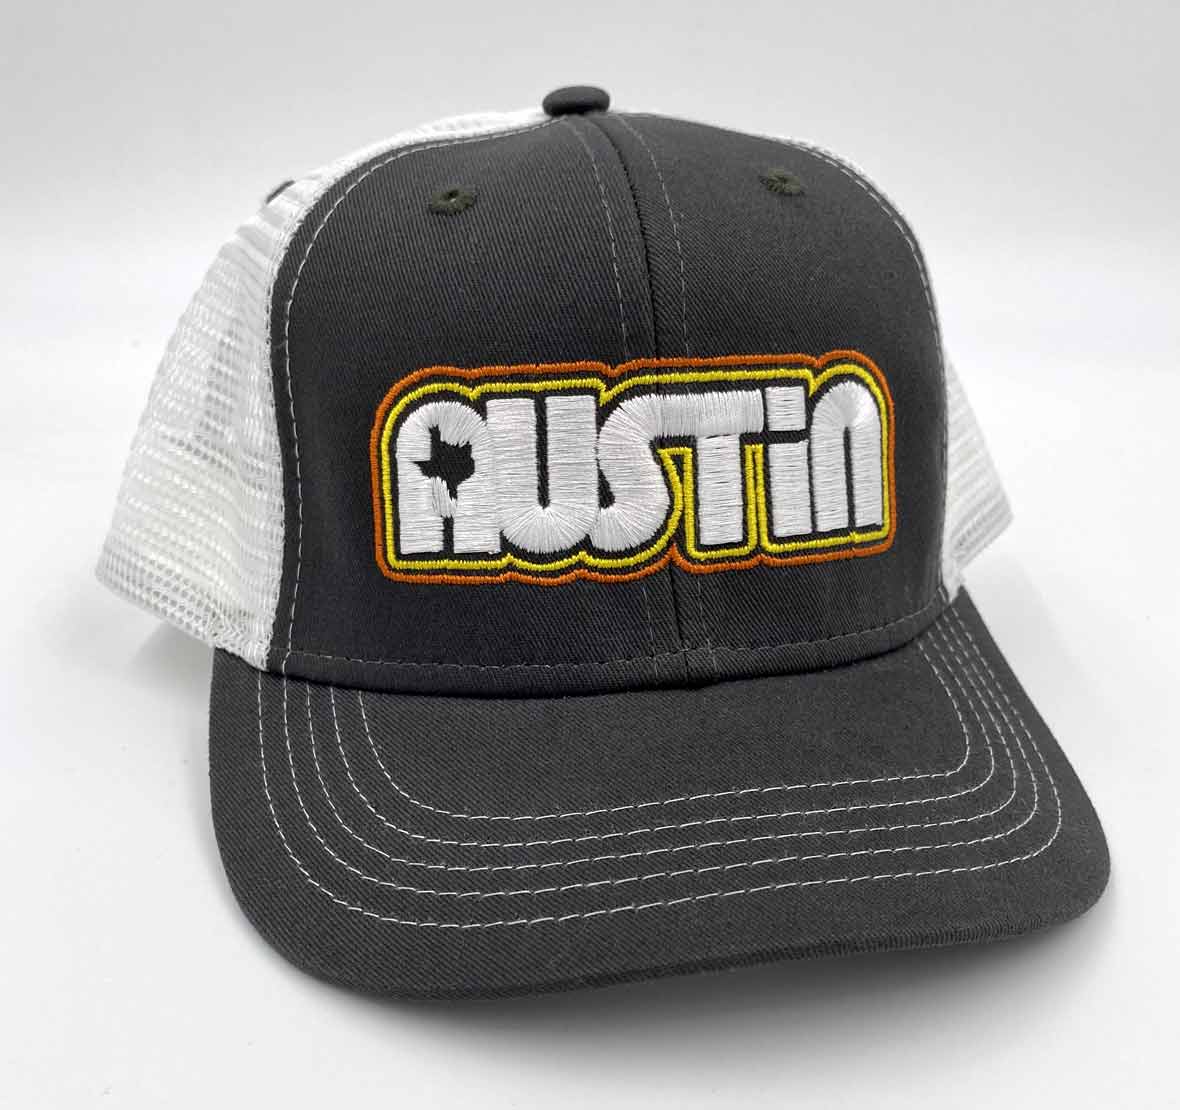 Youth hat, youth cap, texas youth hat, Retro Austin Texas, Austin Texas, texas, youth